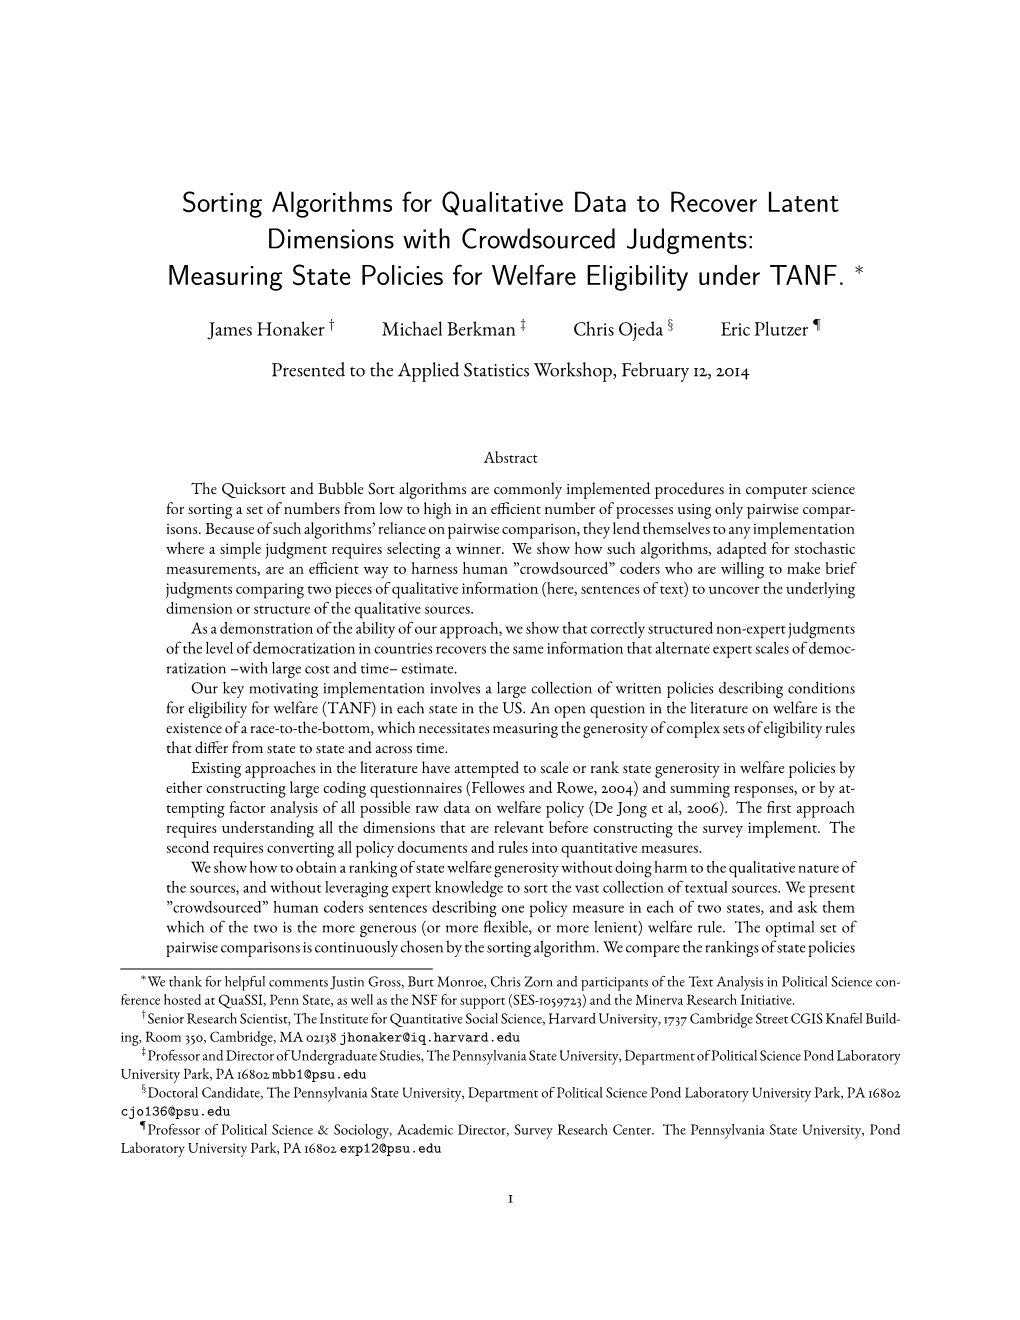 Sorting Algorithms for Qualitative Data to Recover Latent Dimensions with Crowdsourced Judgments: Measuring State Policies for Welfare Eligibility Under TANF